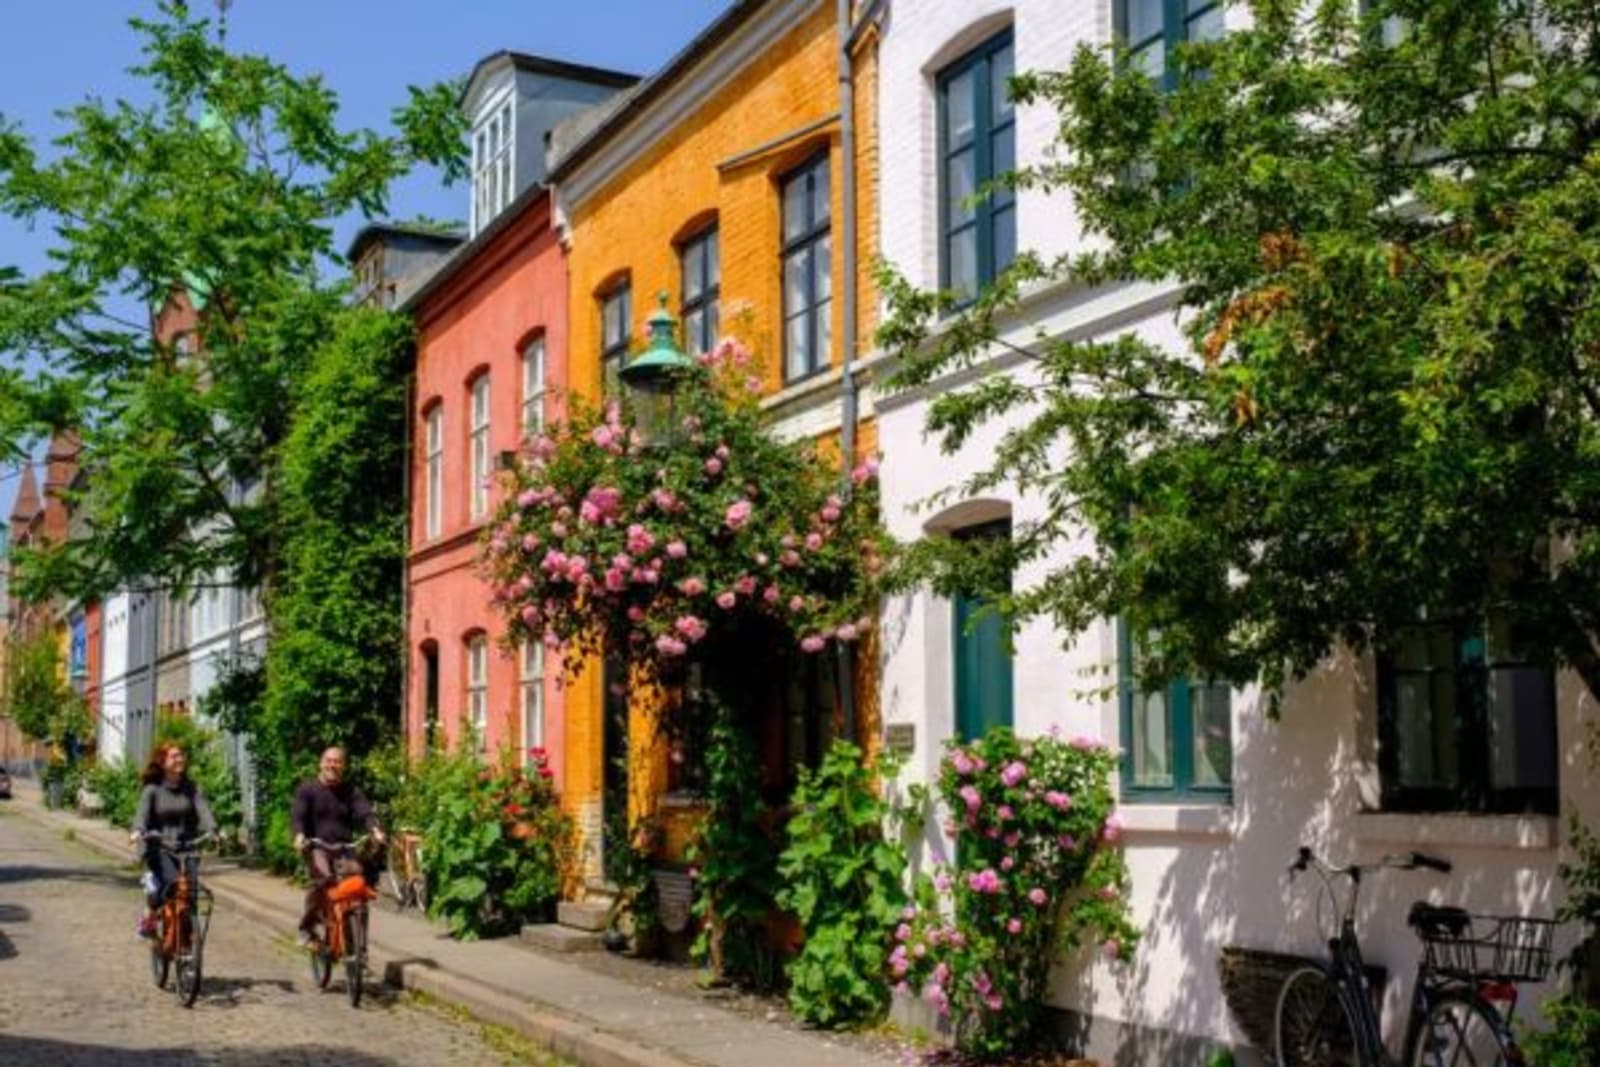 Couple cycling past colourful buildings and greenery